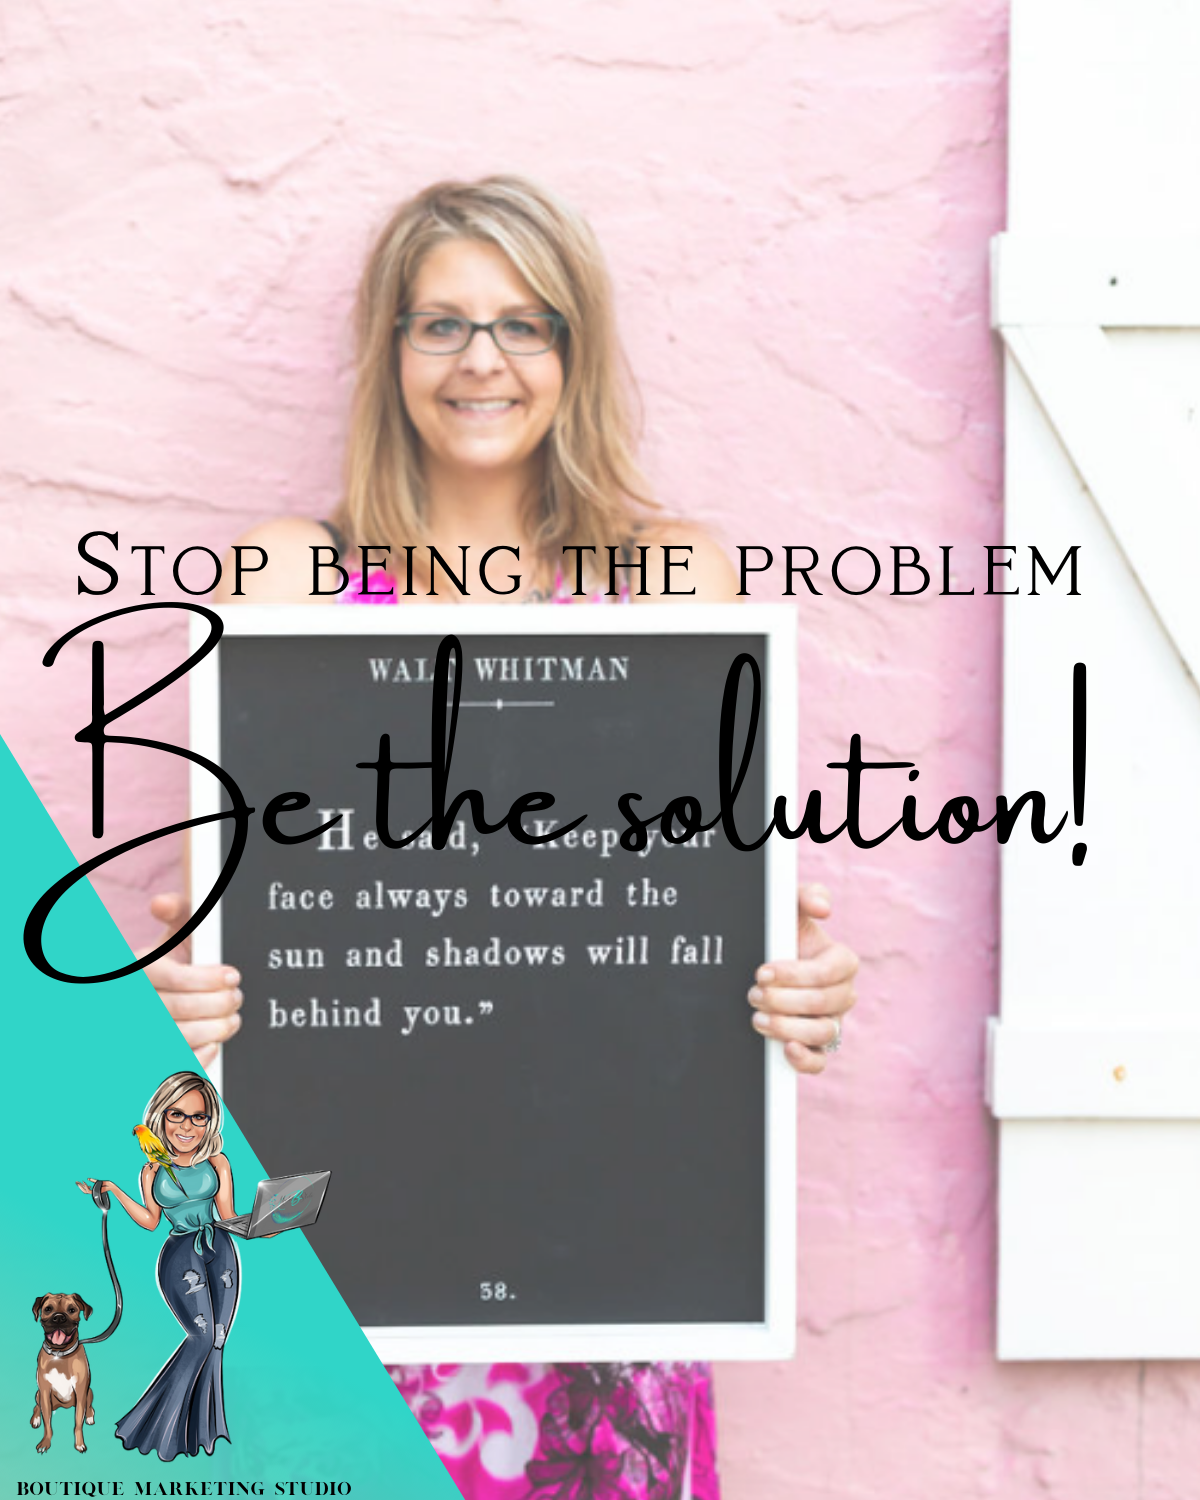 Stop being the Problem and become the SOLUTION 🙊🤷‍♀️